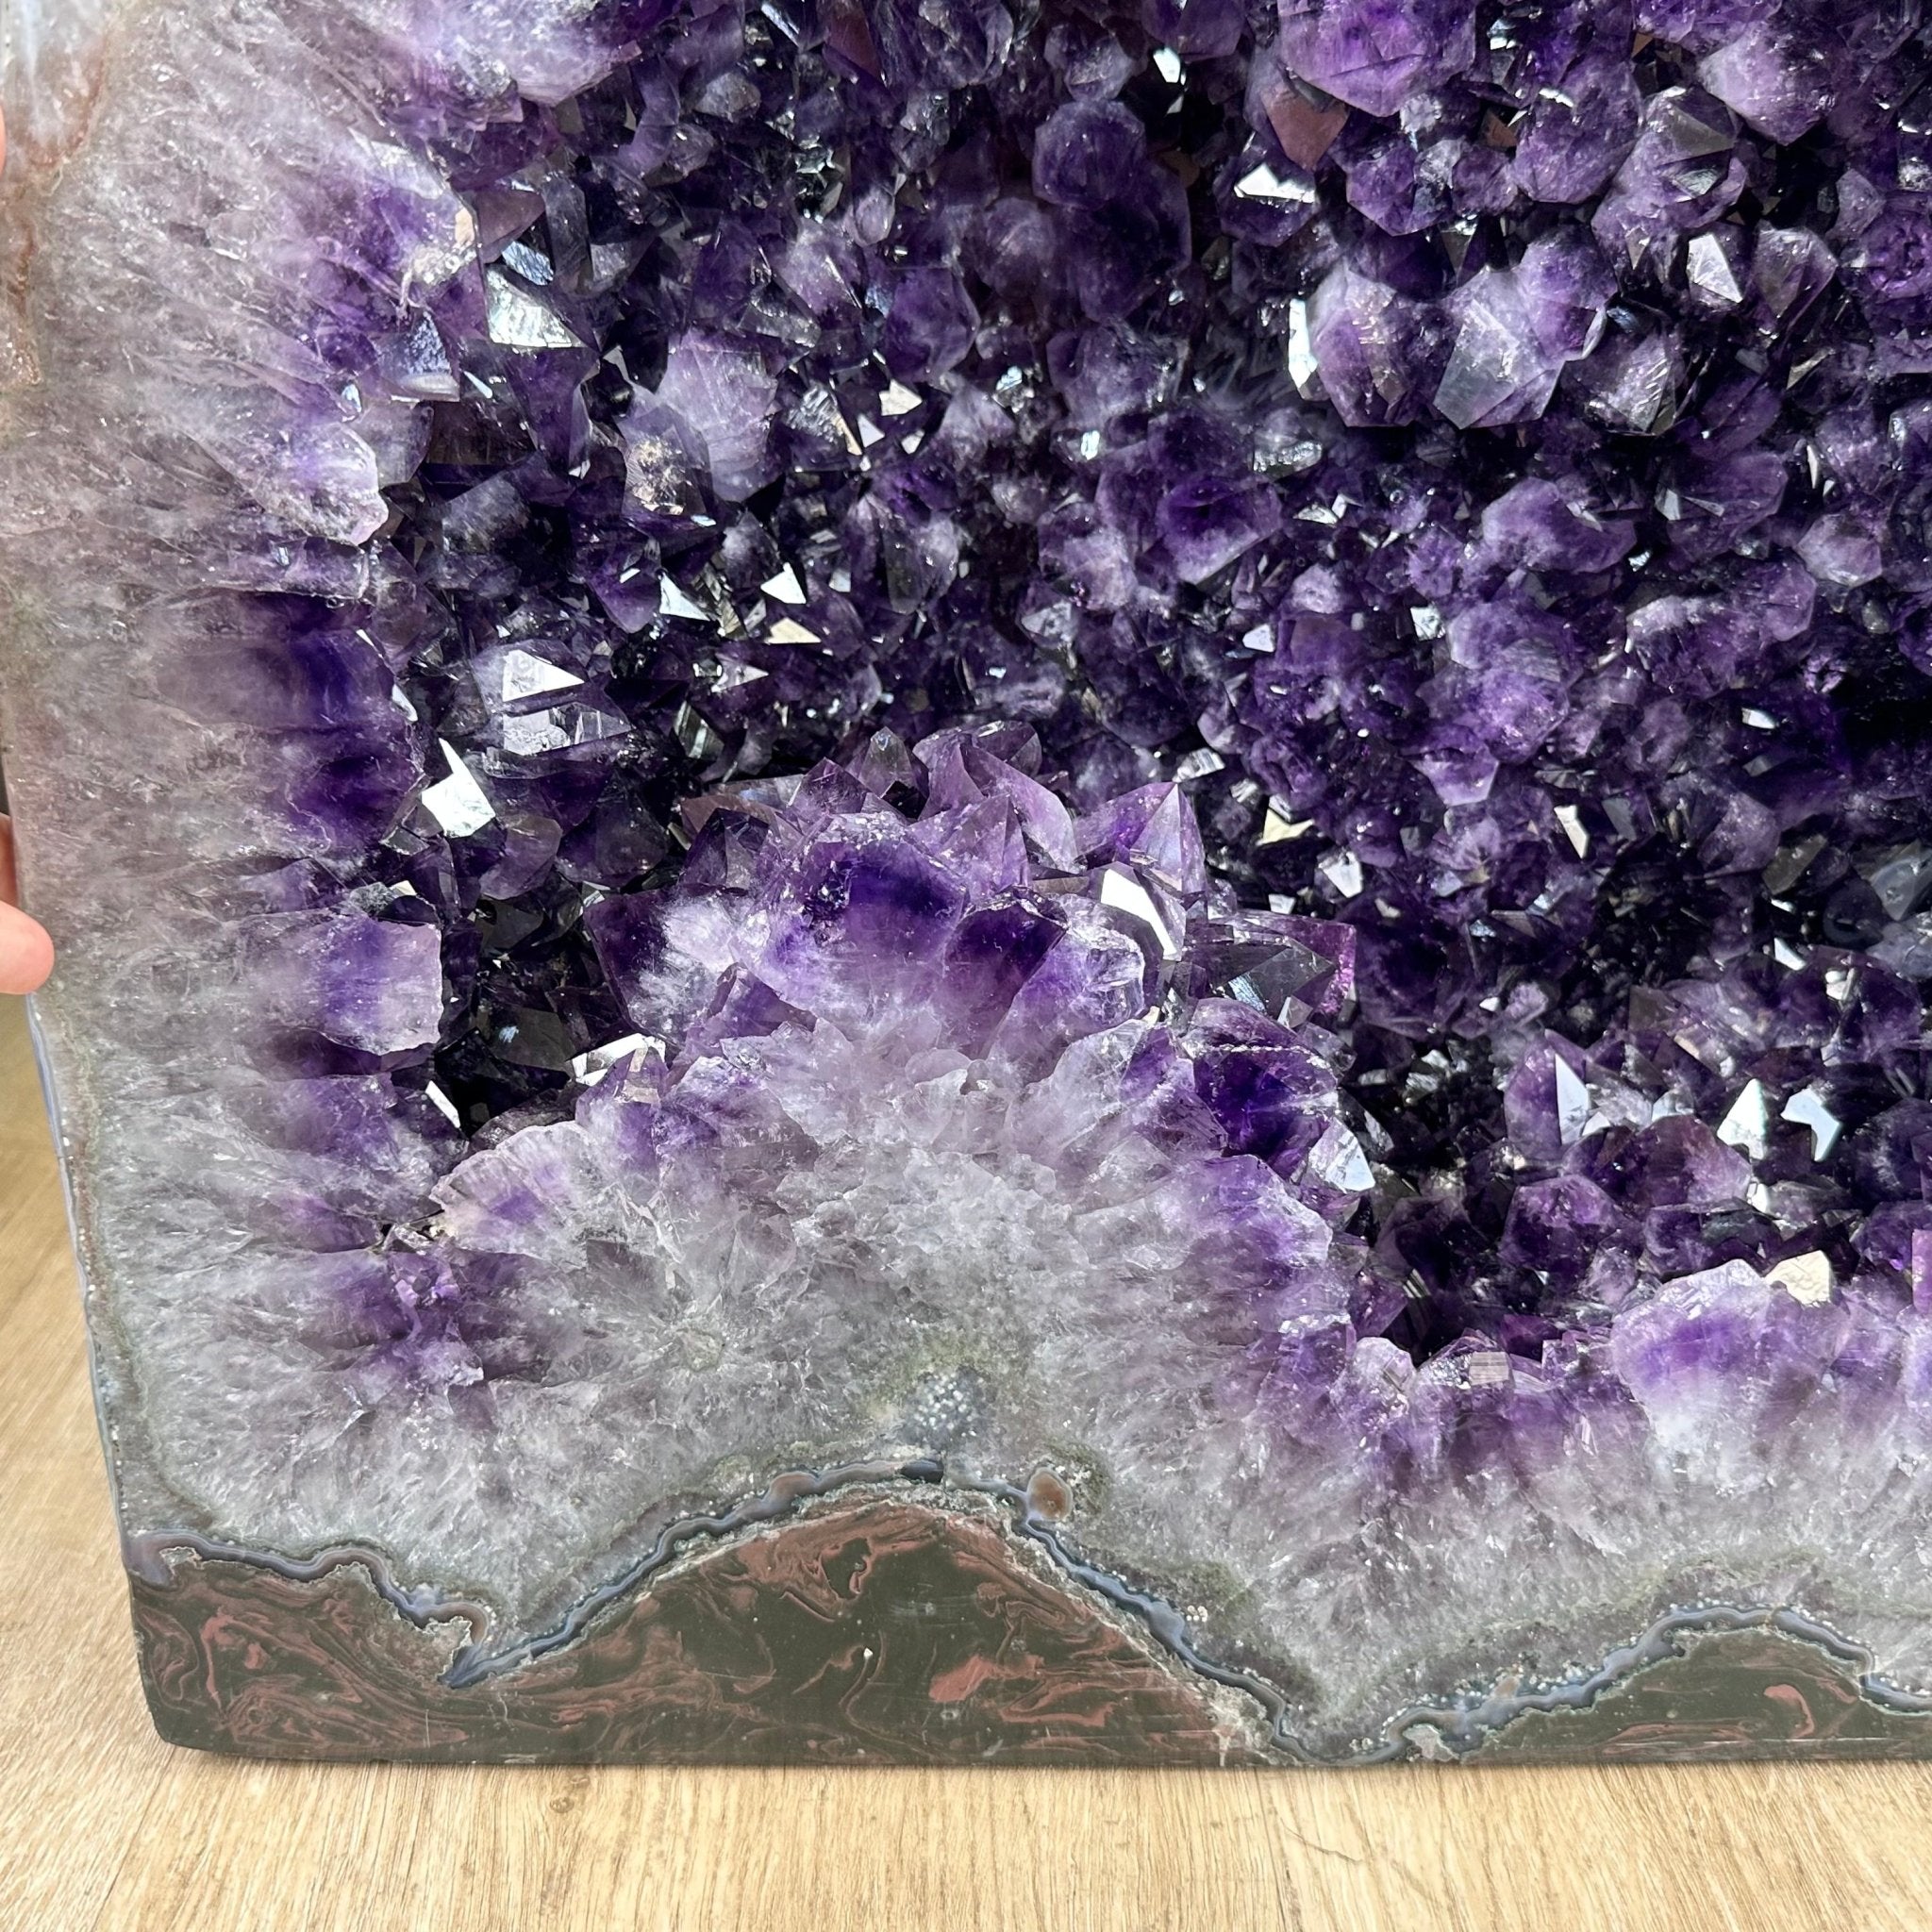 Large Super Quality Polished Brazilian Amethyst Cathedral, 185.7 lbs & 24.5" tall Model #5602-0073 by Brazil Gems - Brazil GemsBrazil GemsLarge Super Quality Polished Brazilian Amethyst Cathedral, 185.7 lbs & 24.5" tall Model #5602-0073 by Brazil GemsPolished Cathedrals5602-0073